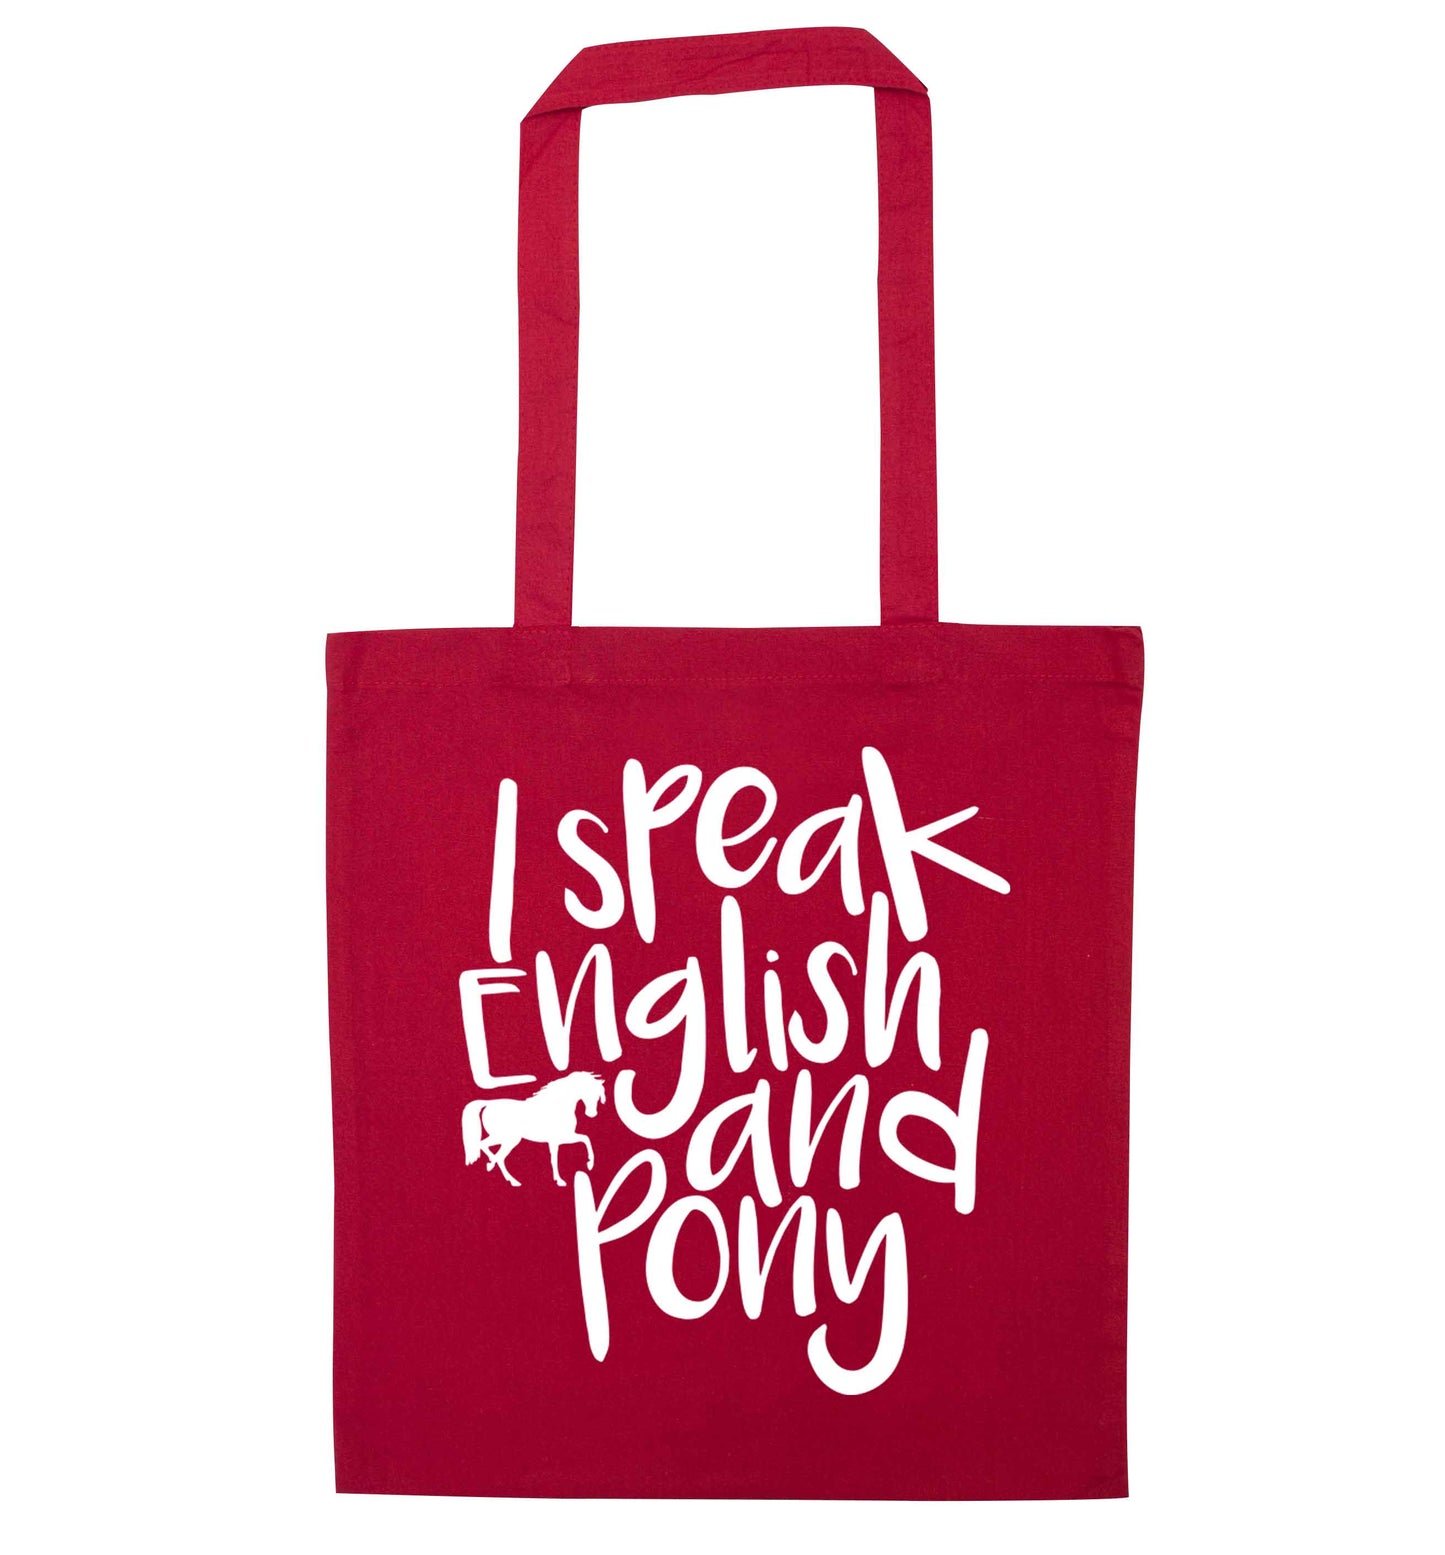 I speak English and pony red tote bag